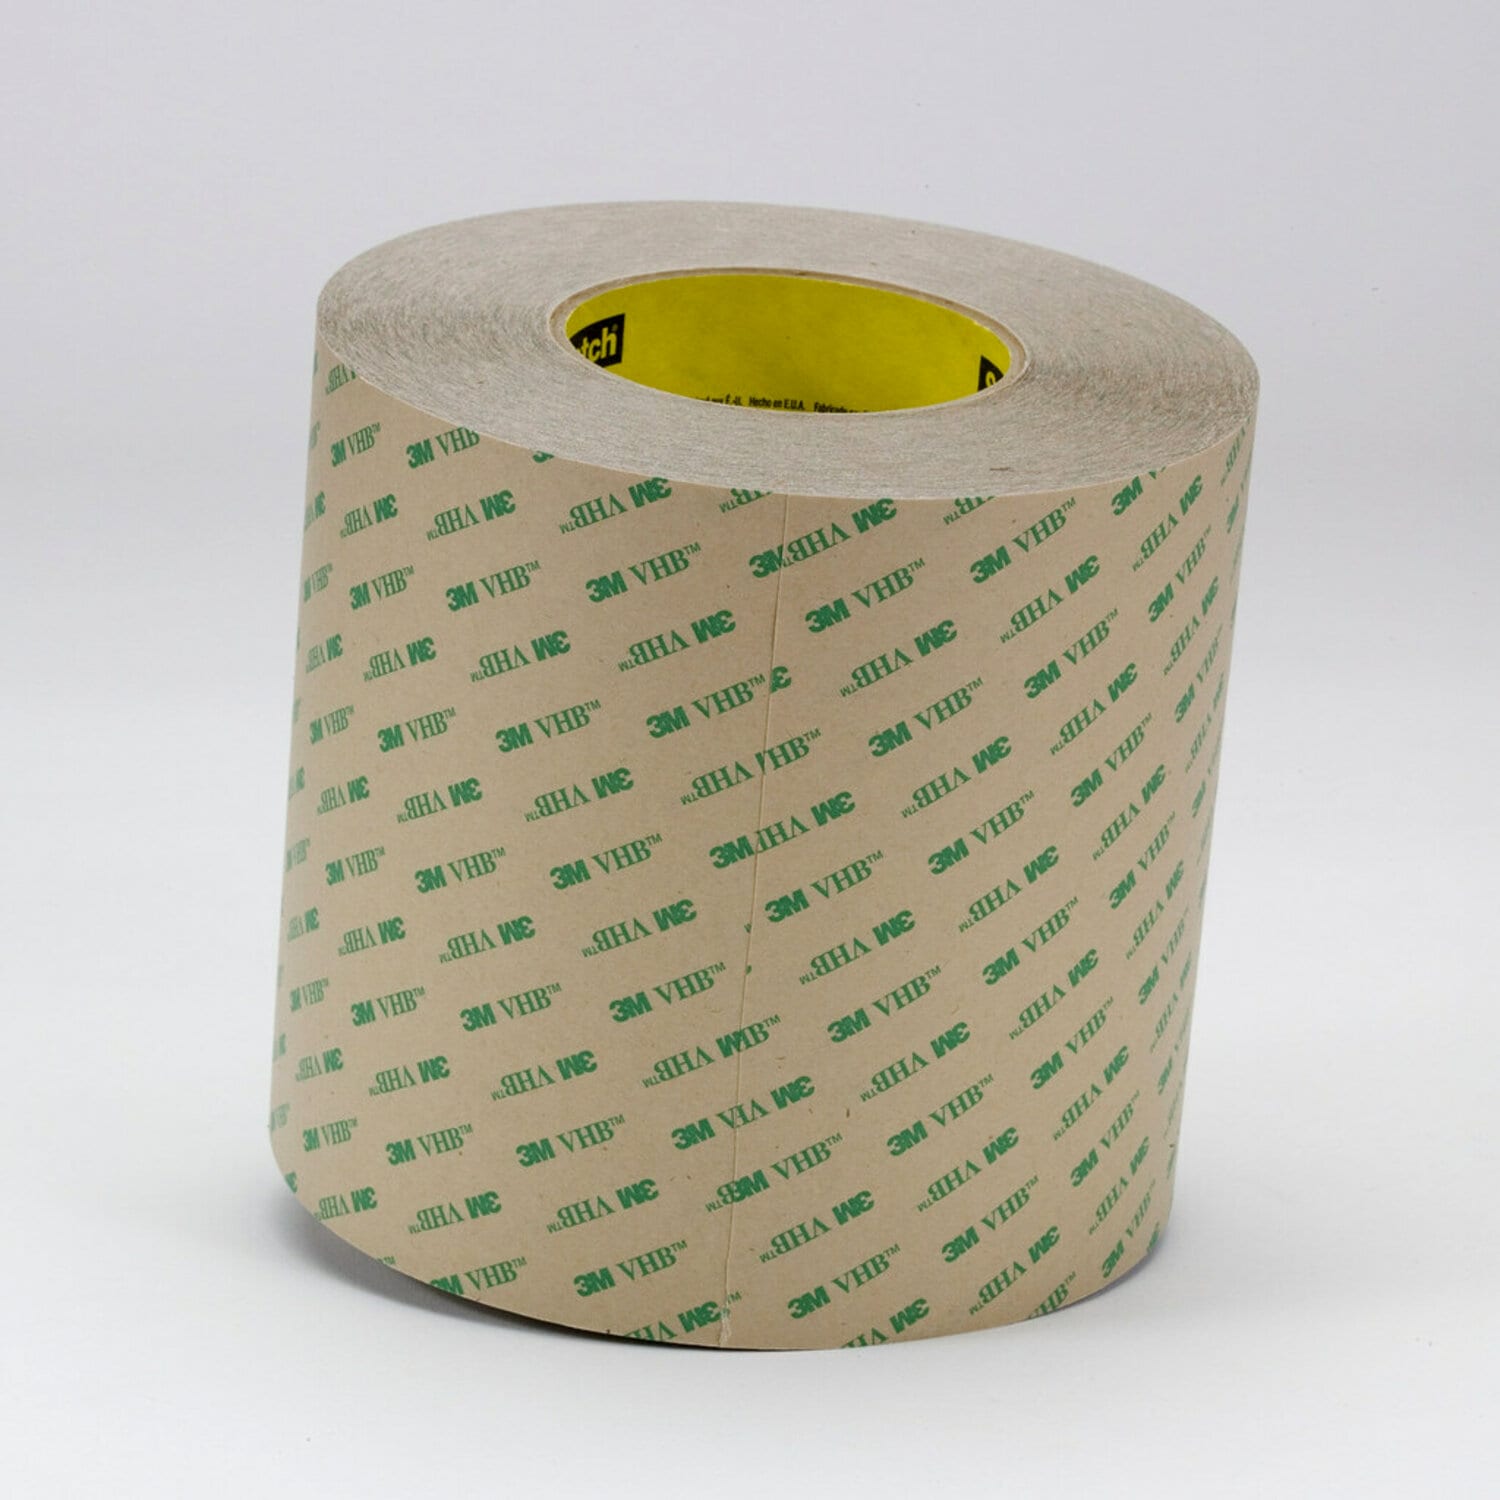 7000115595 - 3M VHB Adhesive Transfer Tape F9460PC, Clear, 1 in x 3 yd, 2 mil, 1
roll per case, Sample